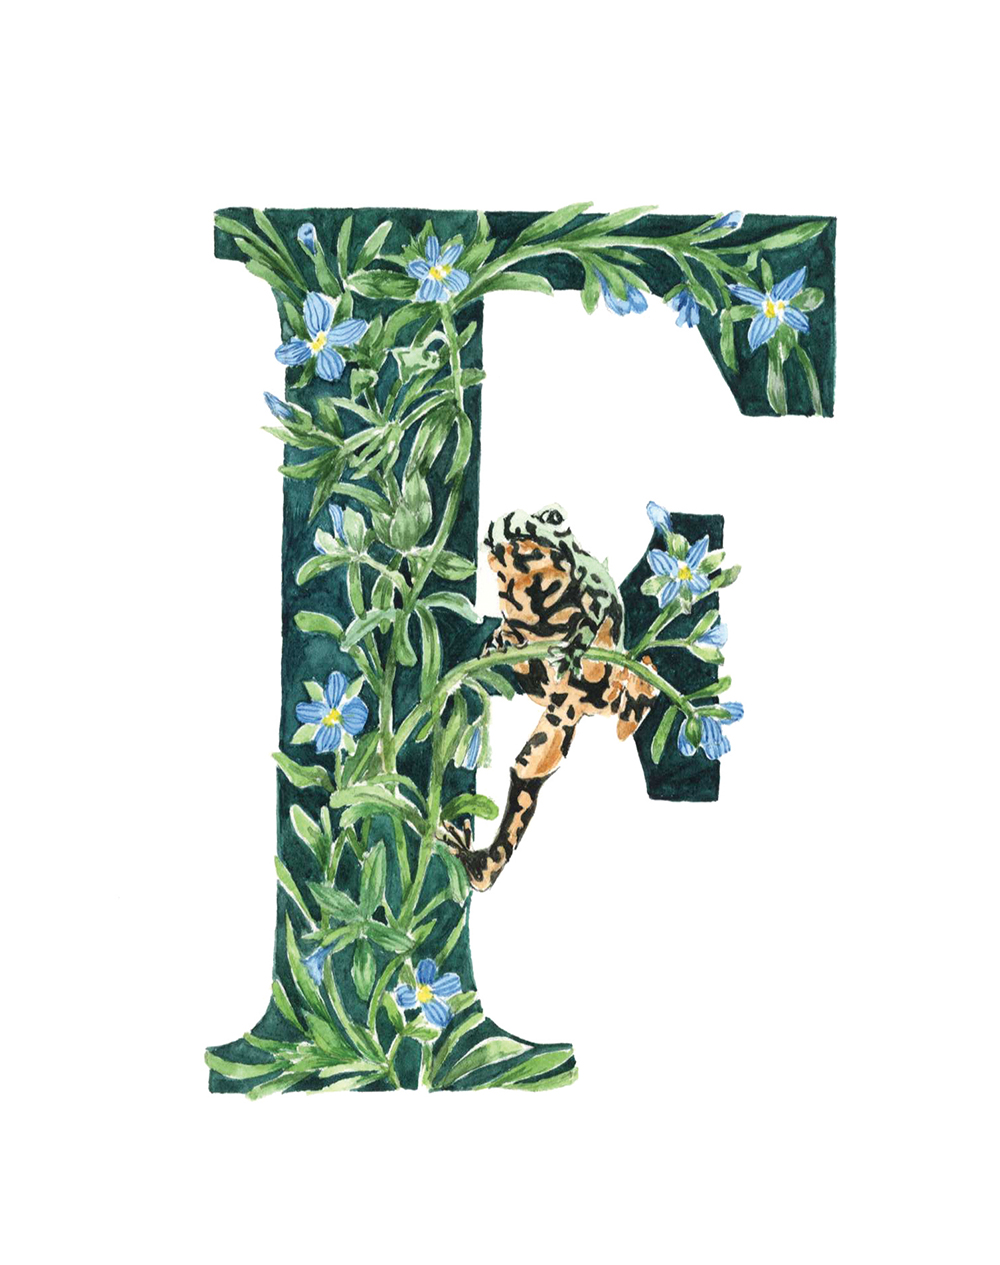 F is for Fingered Speedwell & Fire Bellied Toad. Lettering Illustration